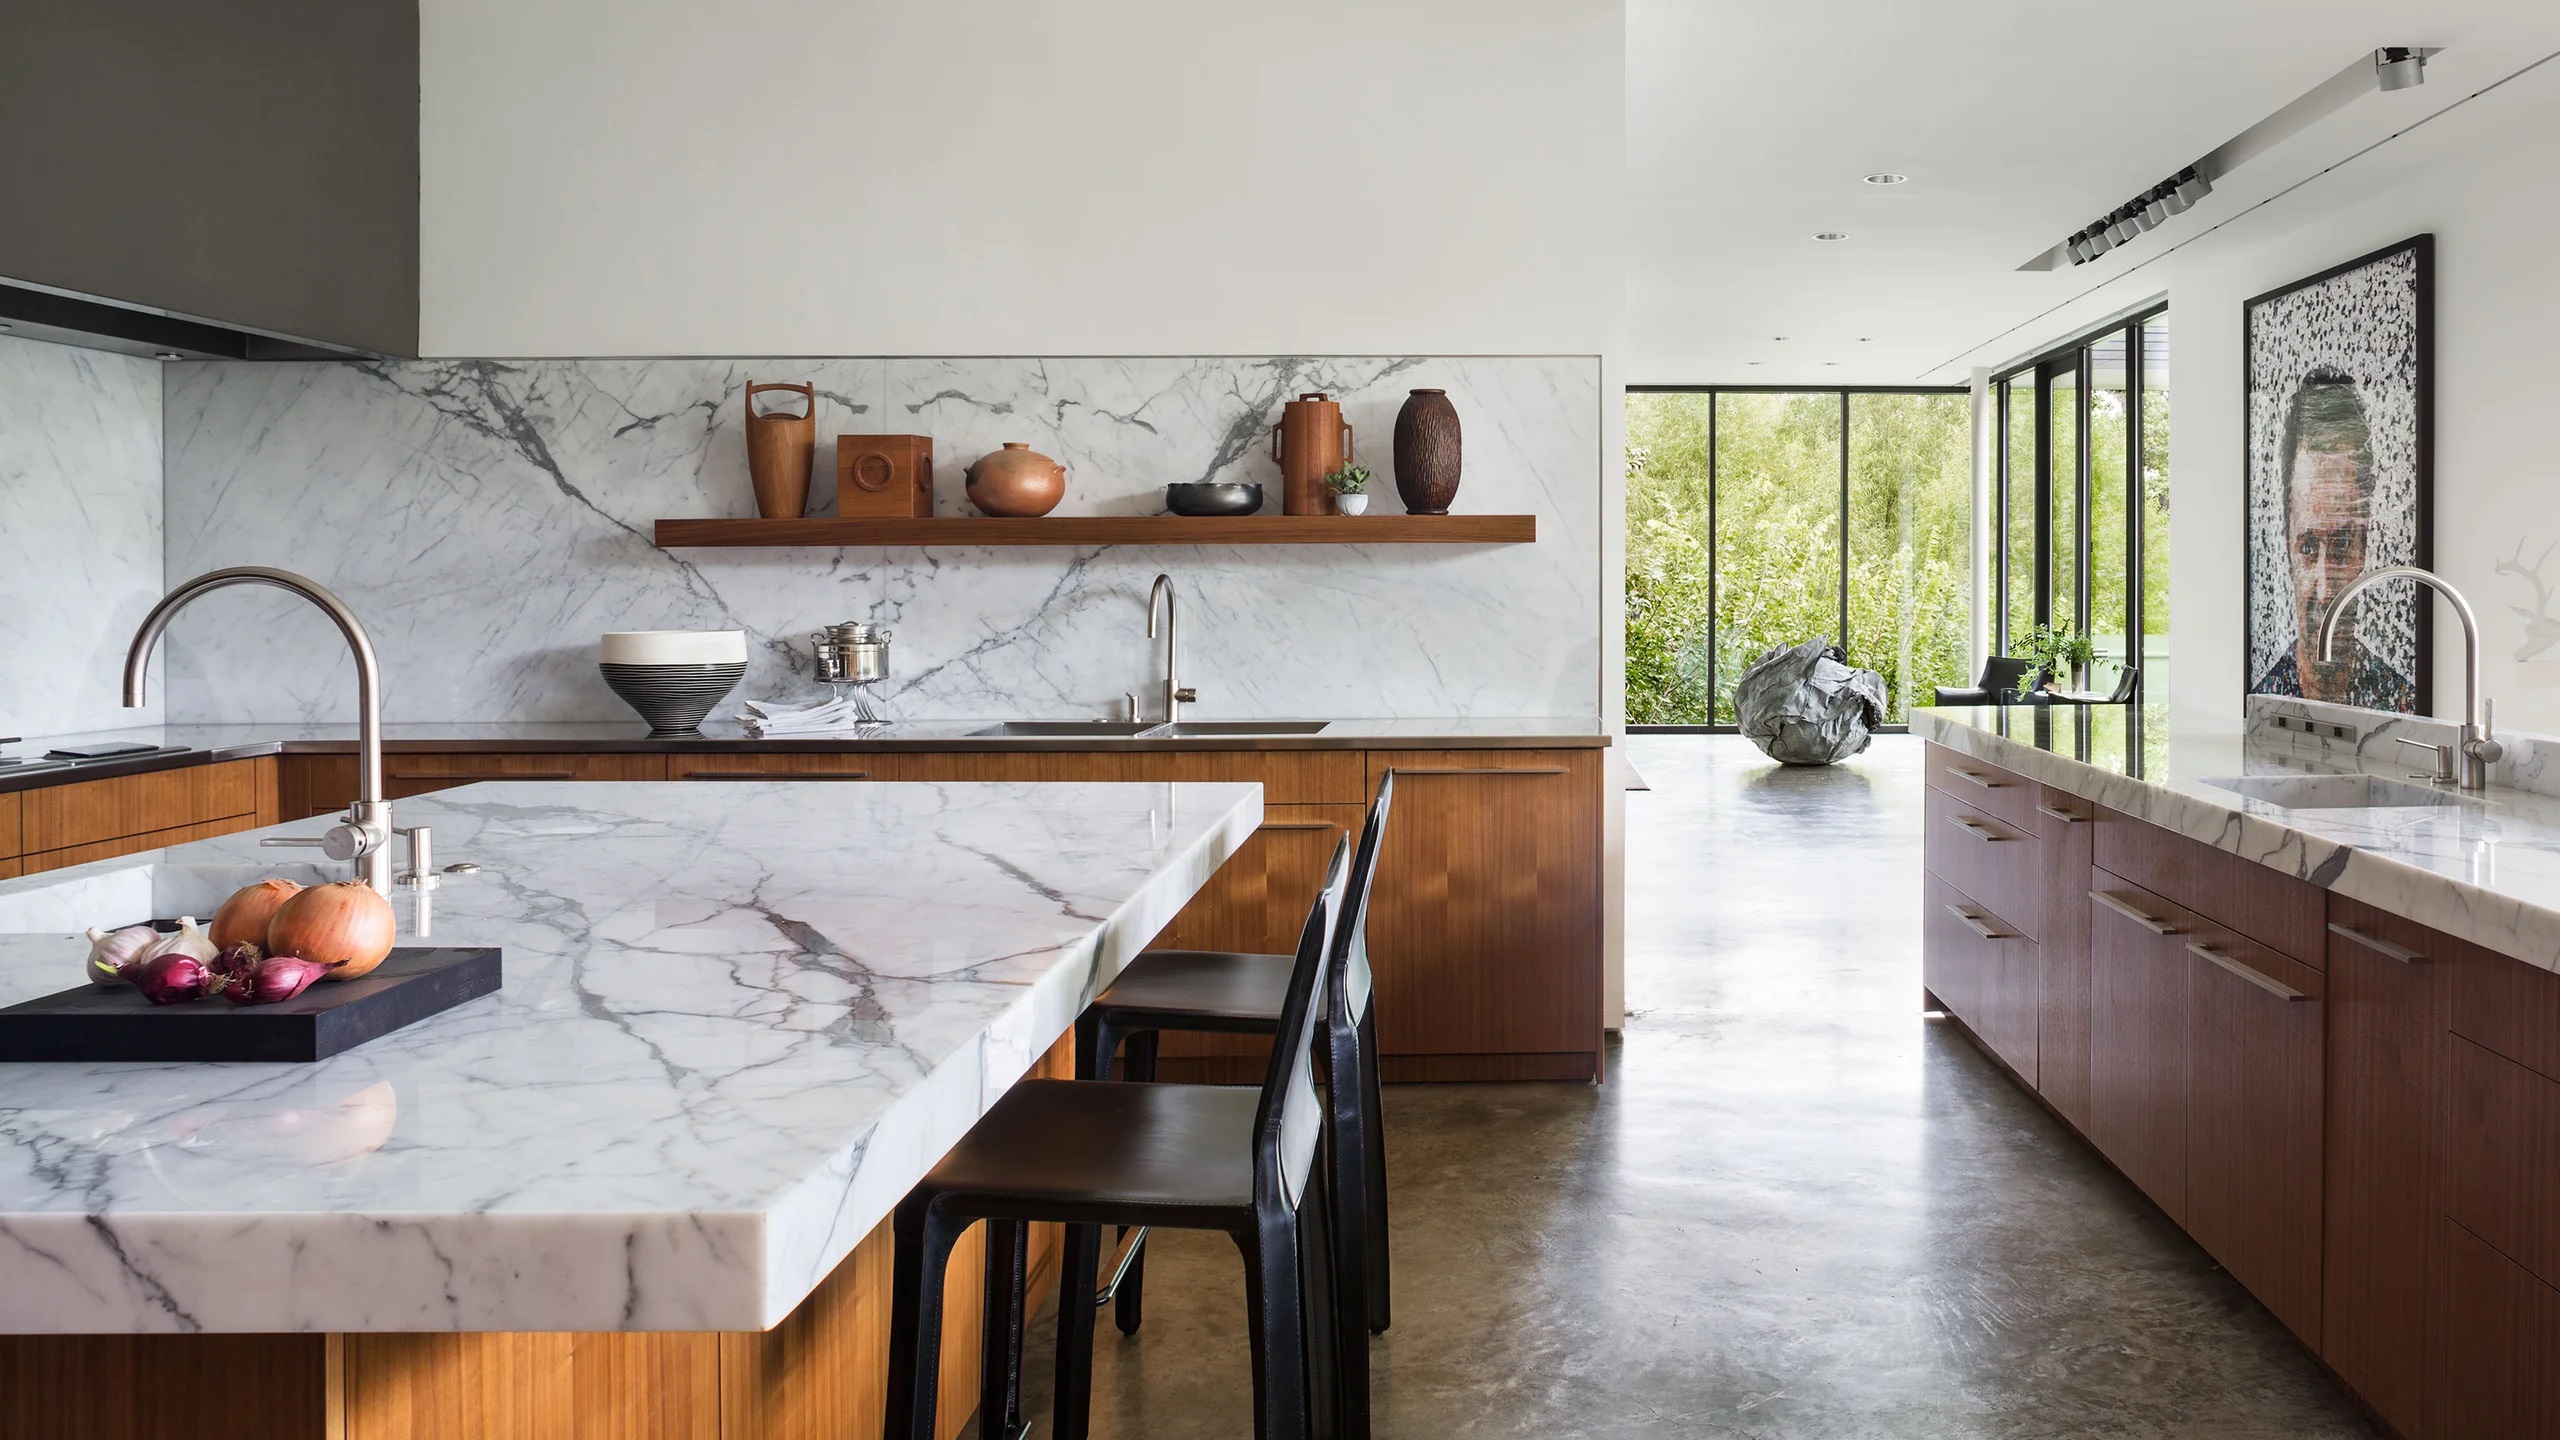 9 Things To Consider When Choosing The Best Countertop Materials For Your Kitchen